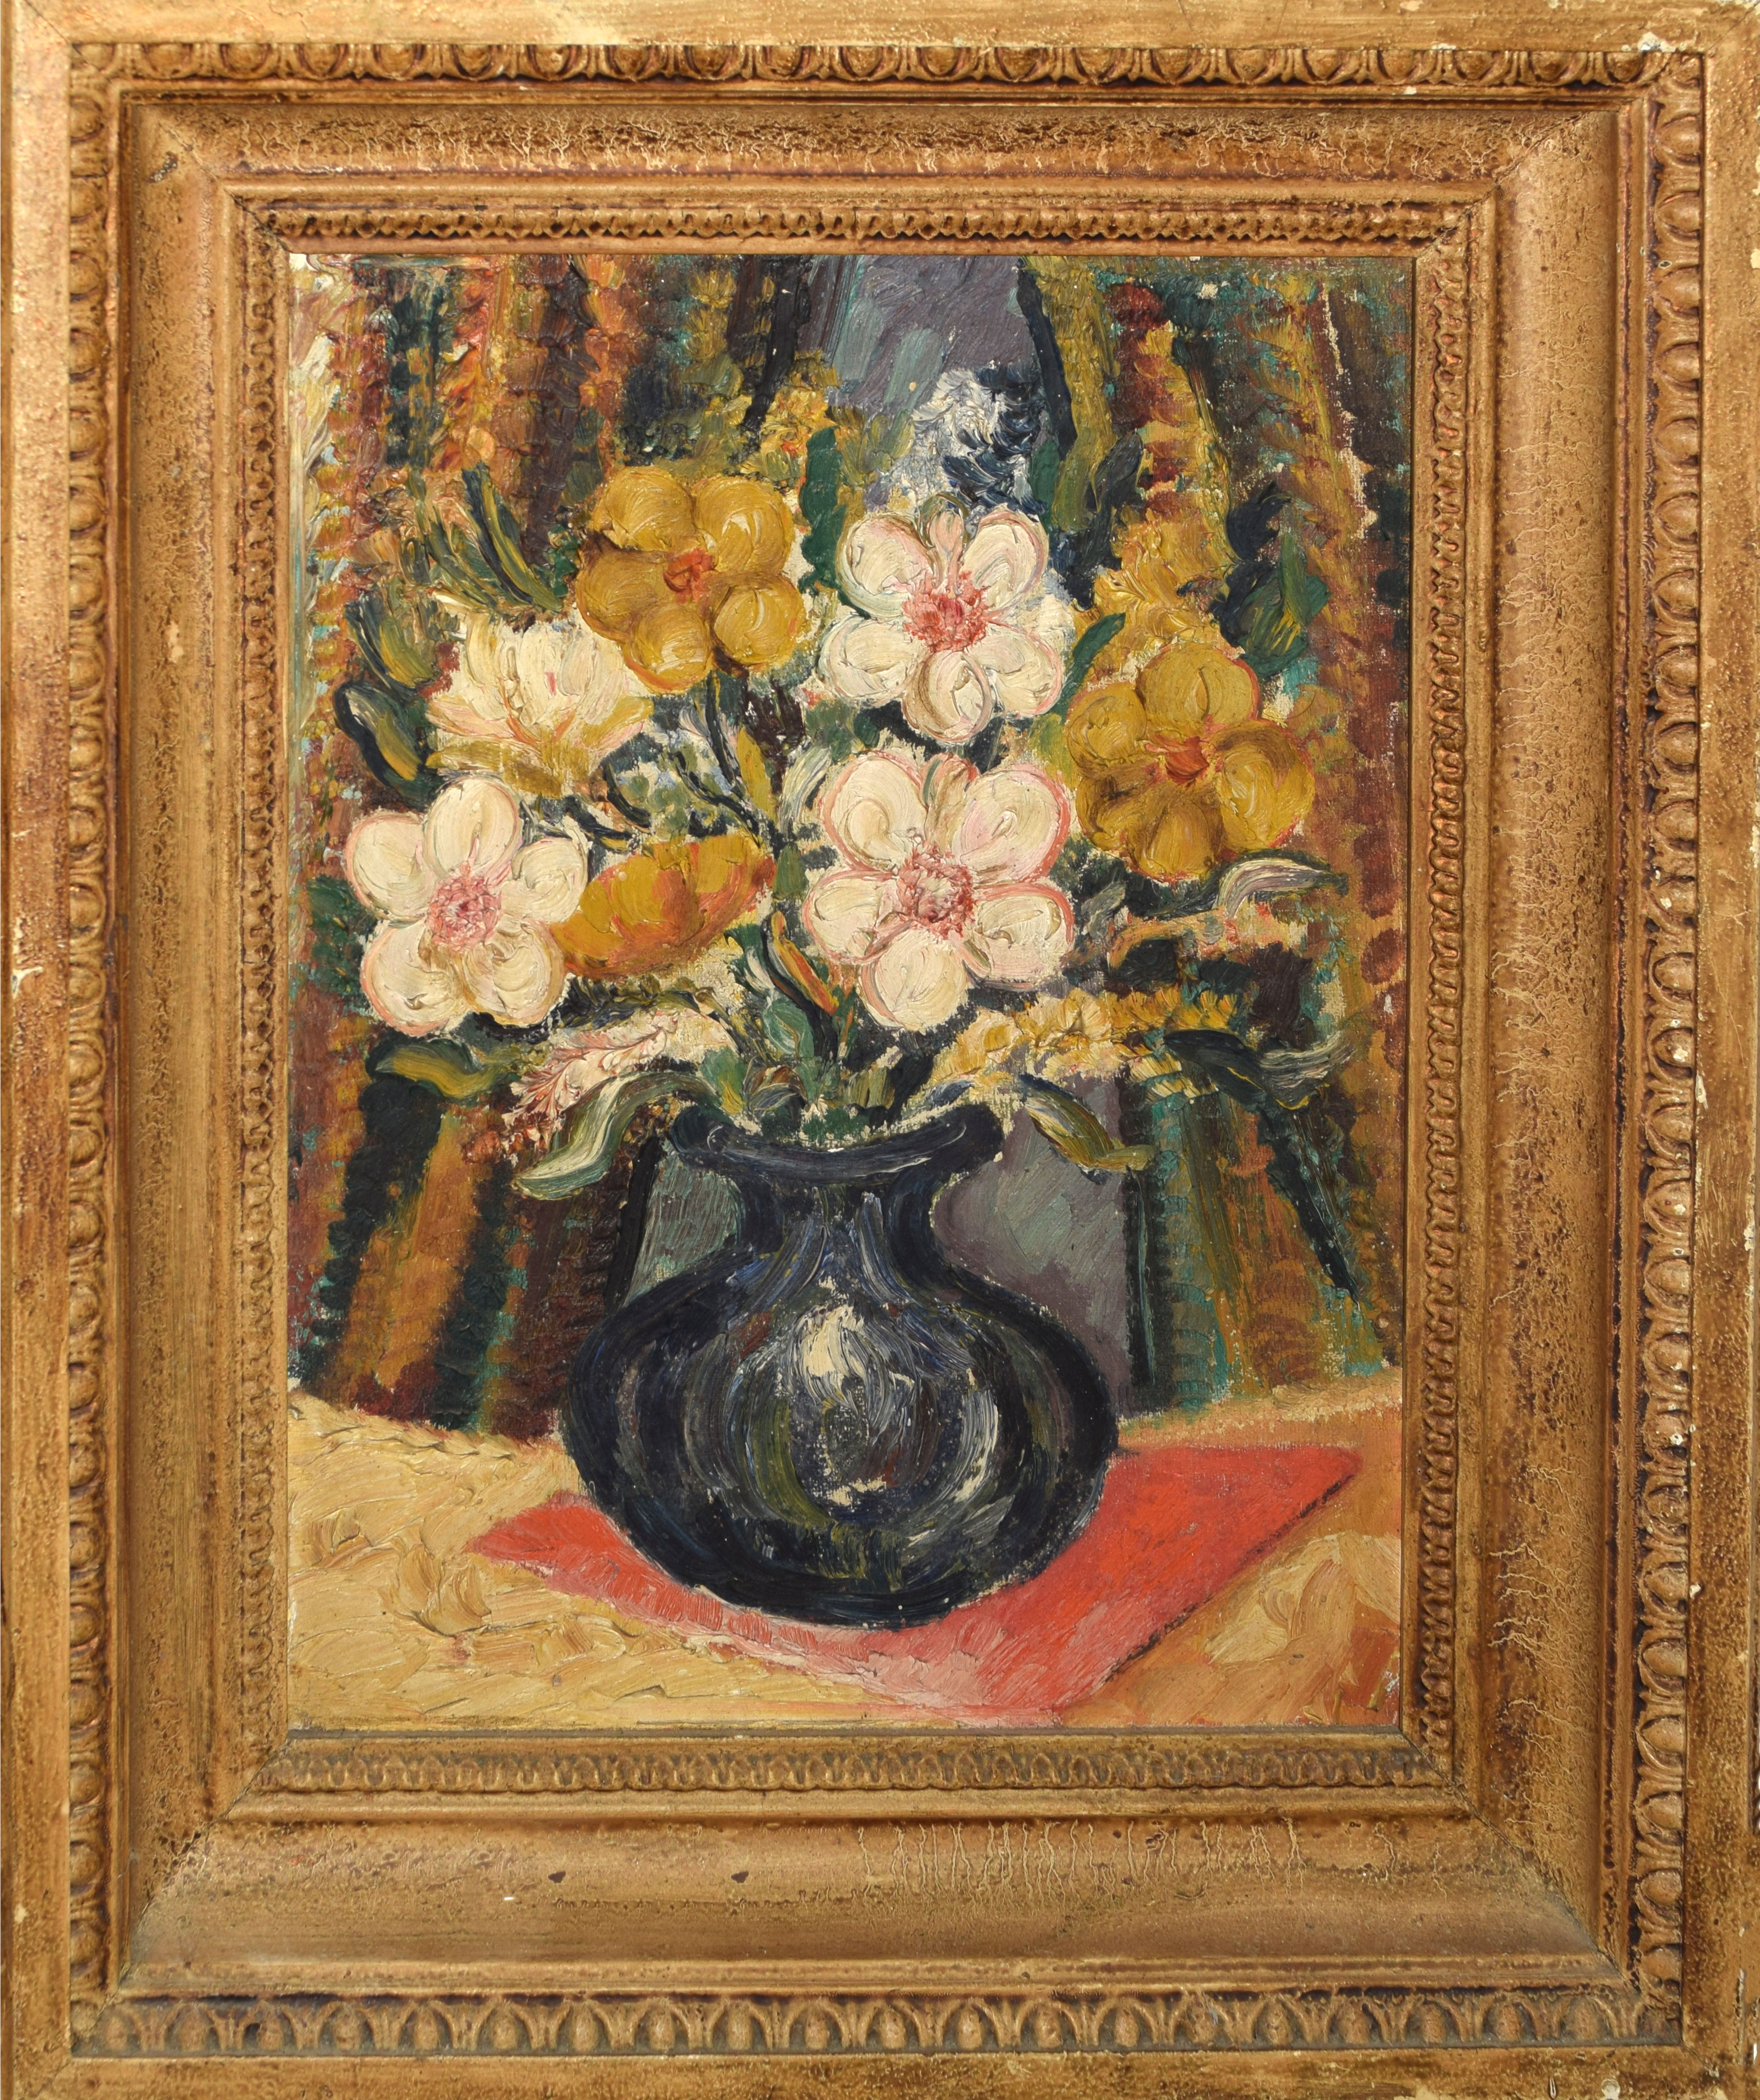 Modern British School (20th century), Still Life study of mixed flowers in a vase, oil on panel,